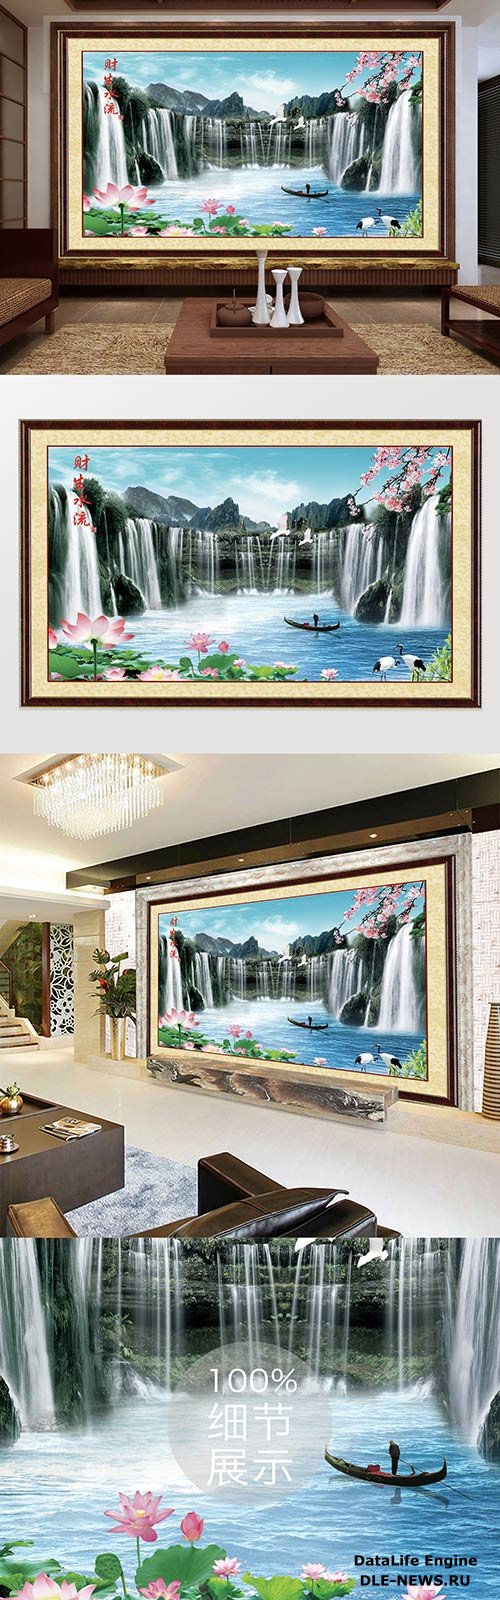 Chinese style framed water and wealthy waterfall lotus white crane tv background